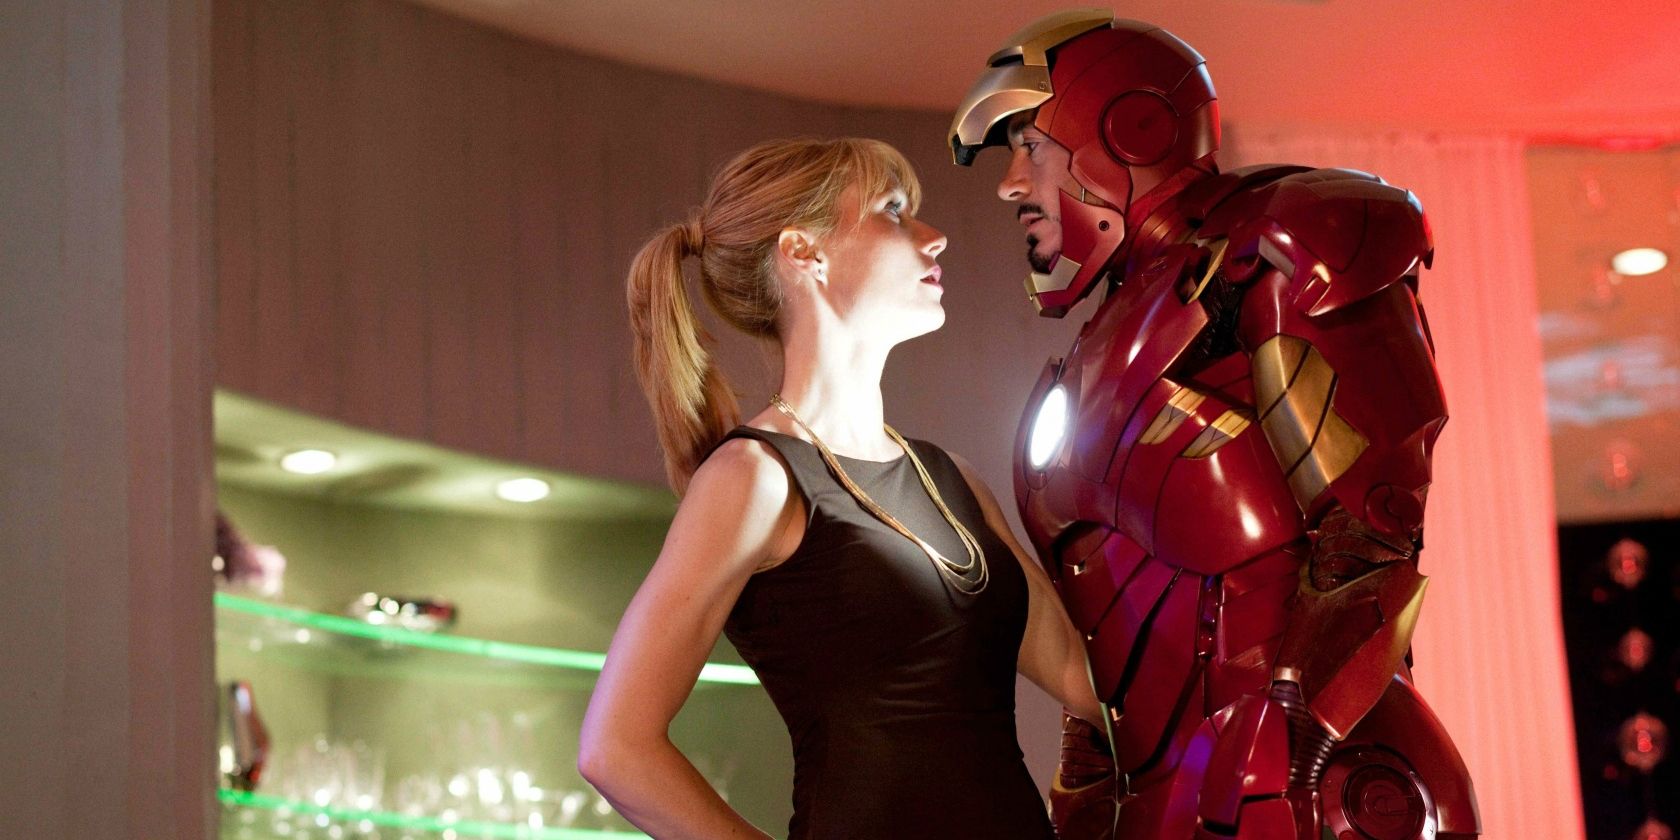 Tony Stark (Robert Downey Jr.) in his Iron Man suit talks to Pepper Potts (Gwyneth Paltrow) at his birthday party in Iron Man 2